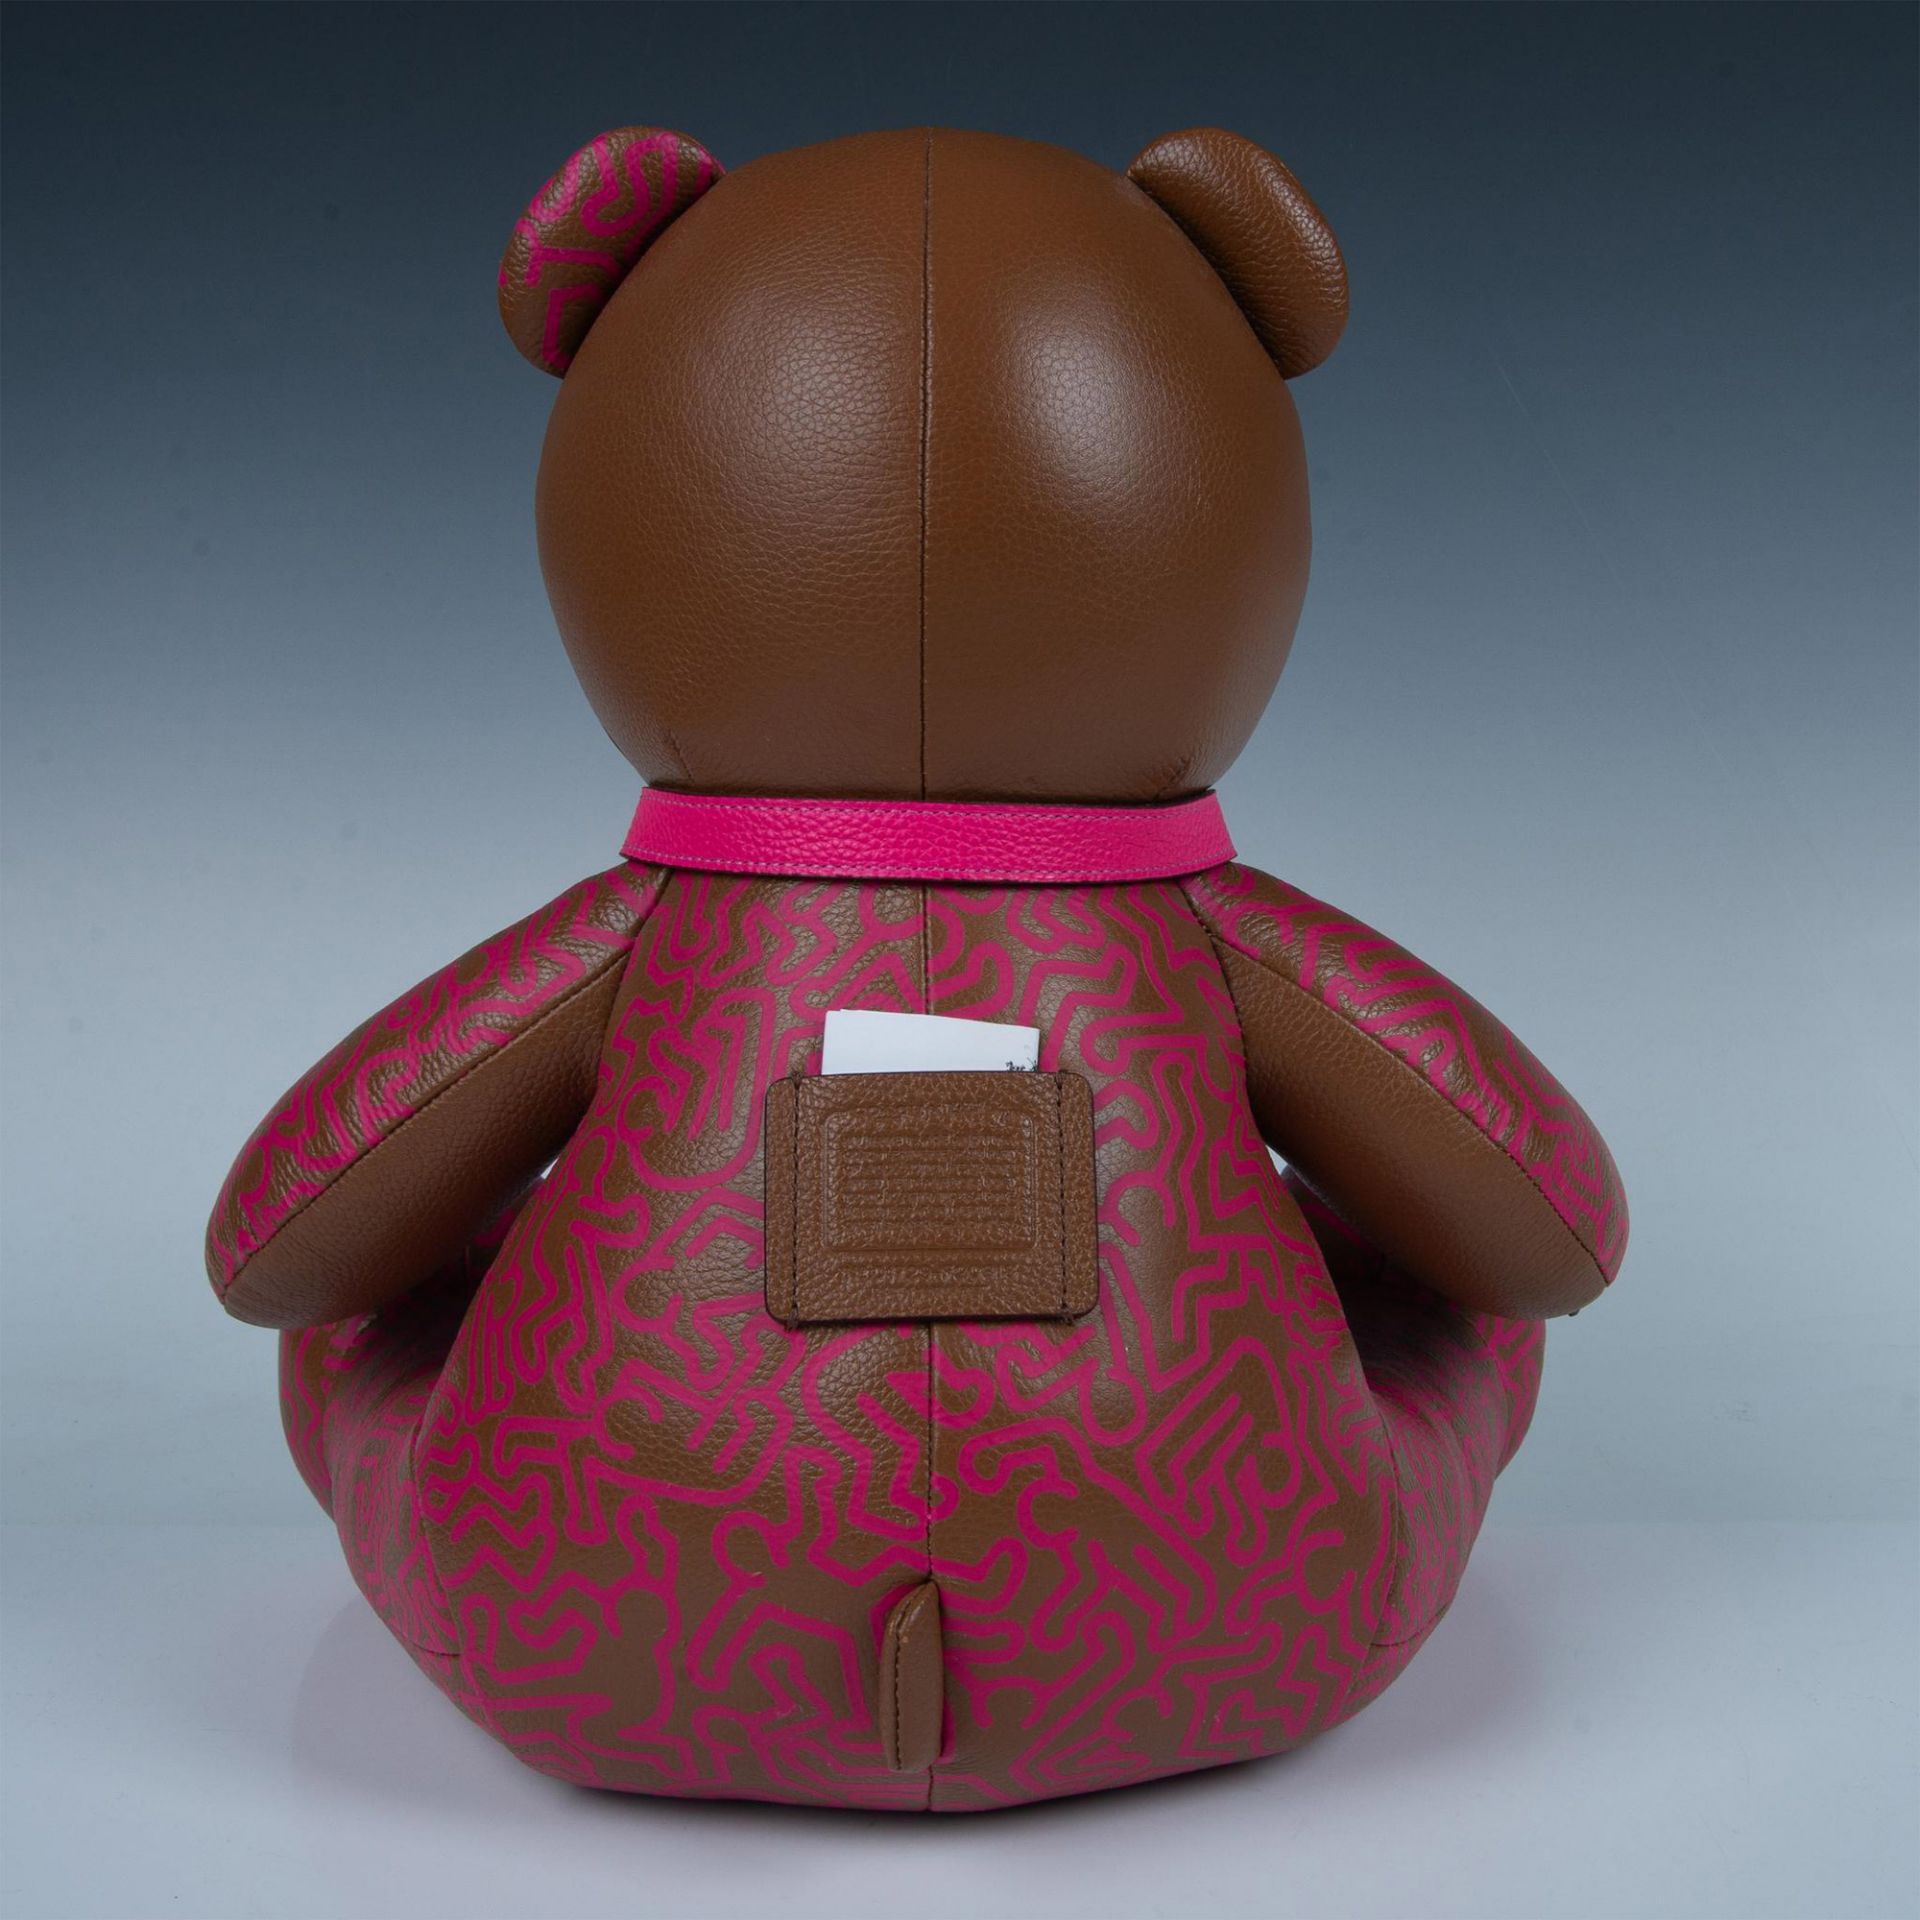 Coach Keith Haring Collaboration Plush Leather Teddy Bear - Image 5 of 7